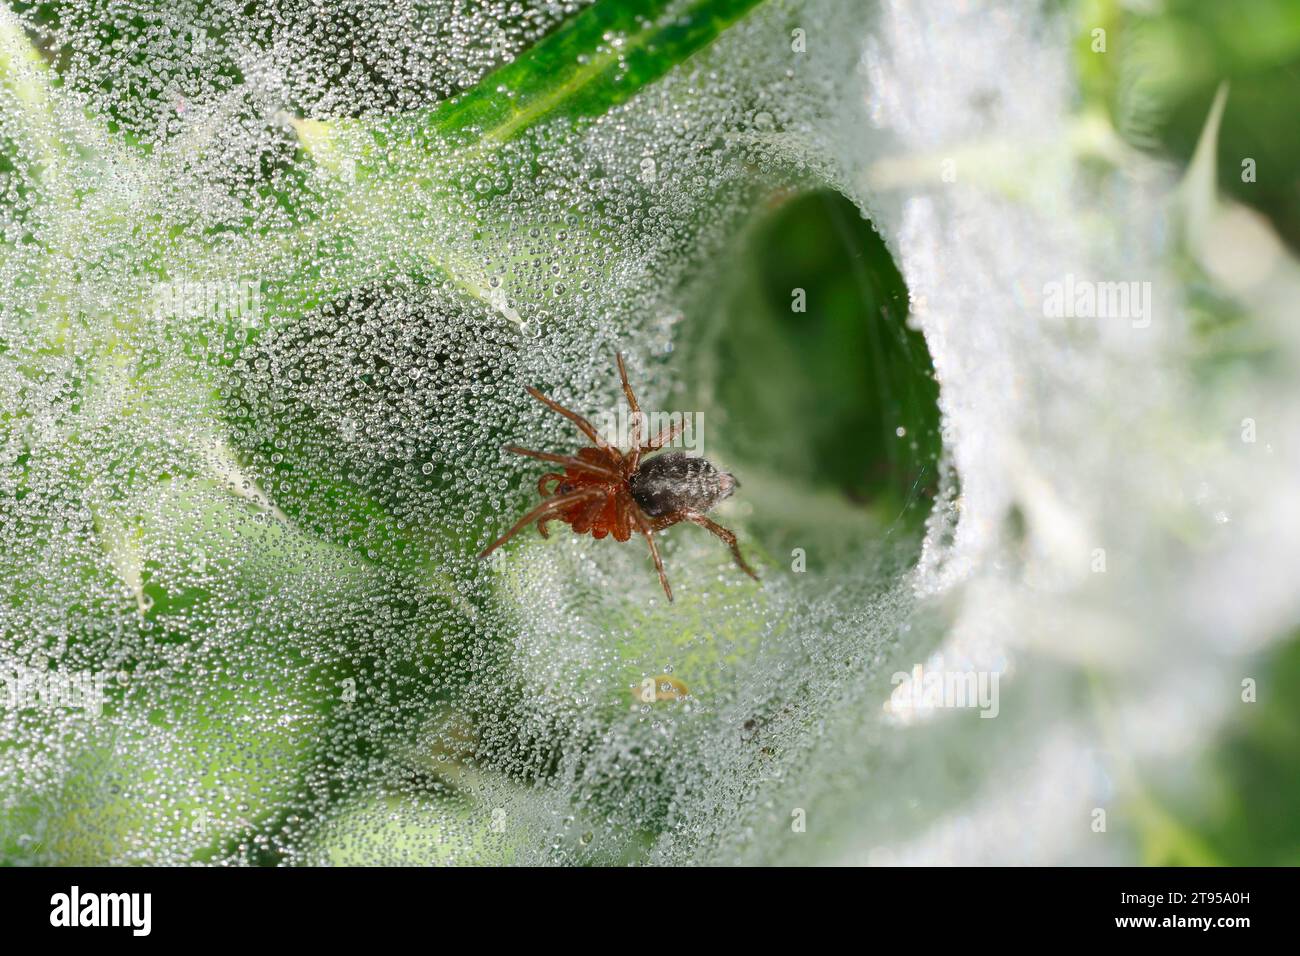 grass funnel-weaver, maze spider (Agelena labyrinthica oder Agelena orientalis), juvenile in web with morning dew drops, Croatia Stock Photo